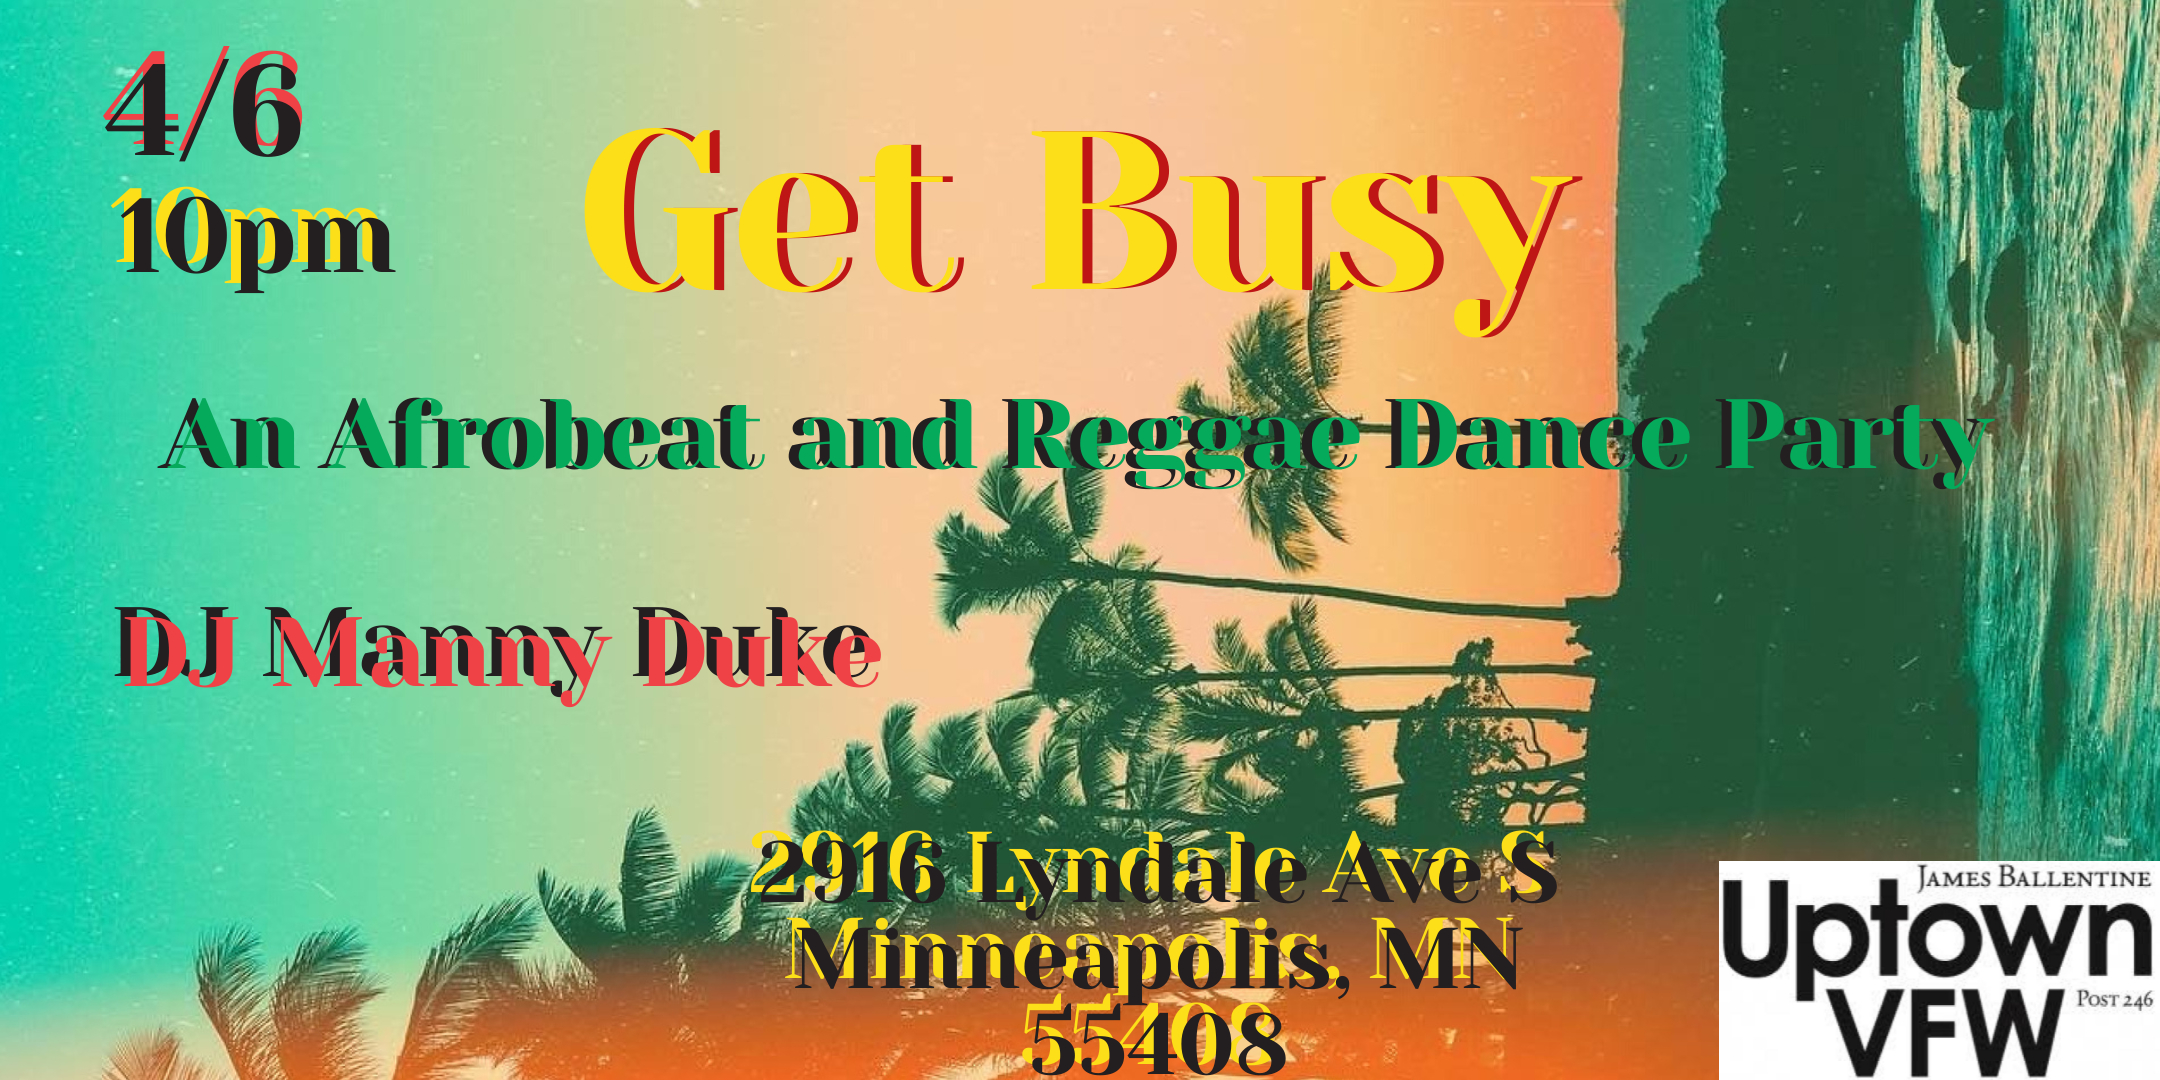 DJ Manny Duke Presents Get Busy An Afrobeat and Reggae Dance Party Saturday, April 6 James Ballentine "Uptown" VFW Post 246 Doors 10:00pm :: Music 10:00pm :: 21+ GA $5 ADV / $10 DOS NO REFUNDS Ticket On-Sale Now